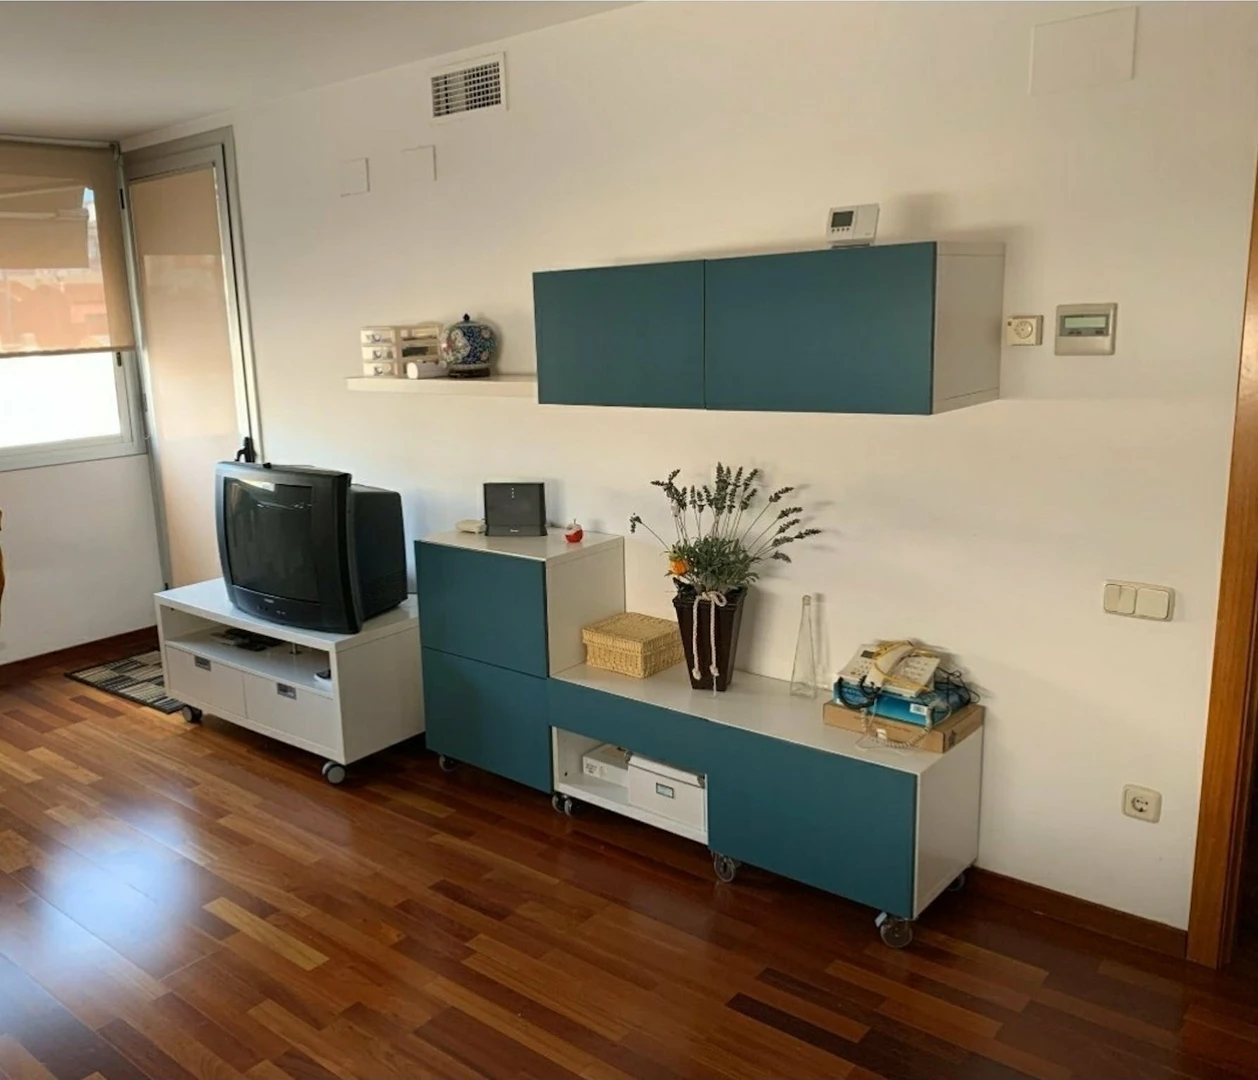 Room for rent with double bed Terrassa